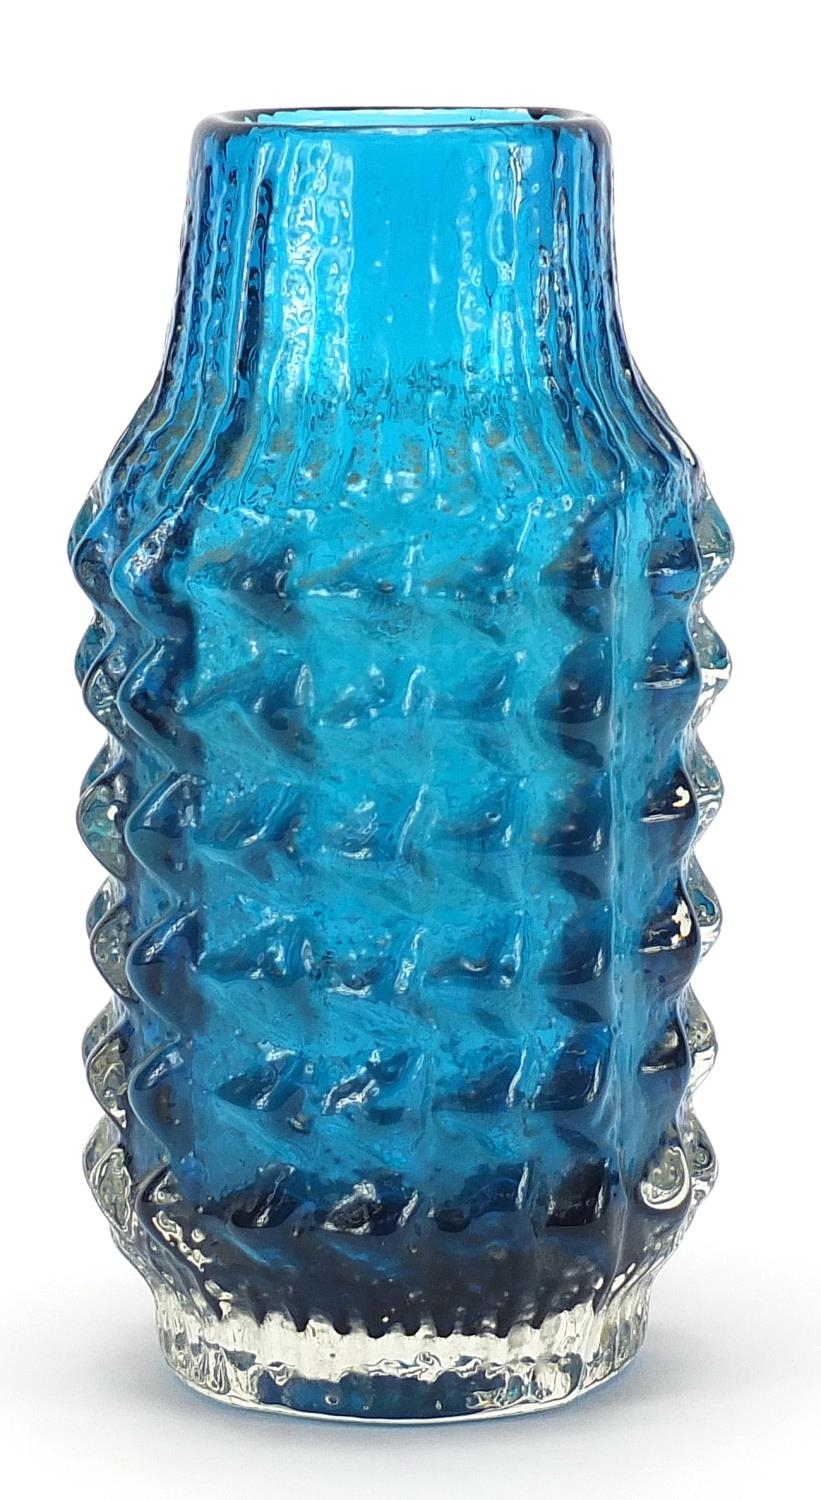 Geoffrey Baxter for Whitefriars, pineapple glass vase in kingfisher blue, 18cm high